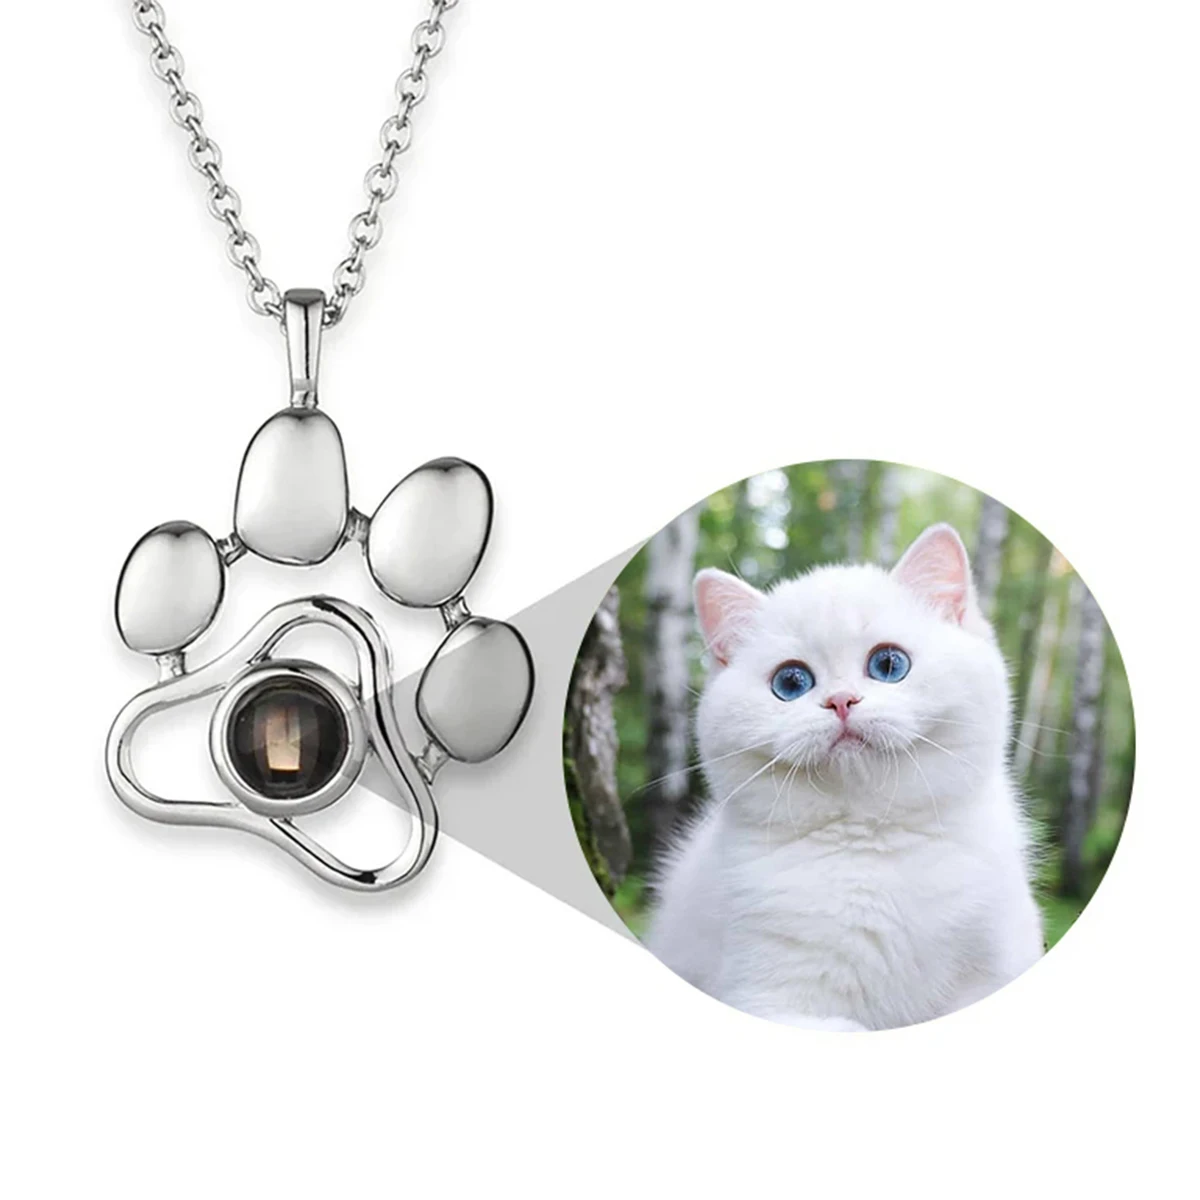 Personalized Projection Pet Photo necklace Personalized Dog necklace Custom Cat necklace Pet Memorial Gift Pet Chain